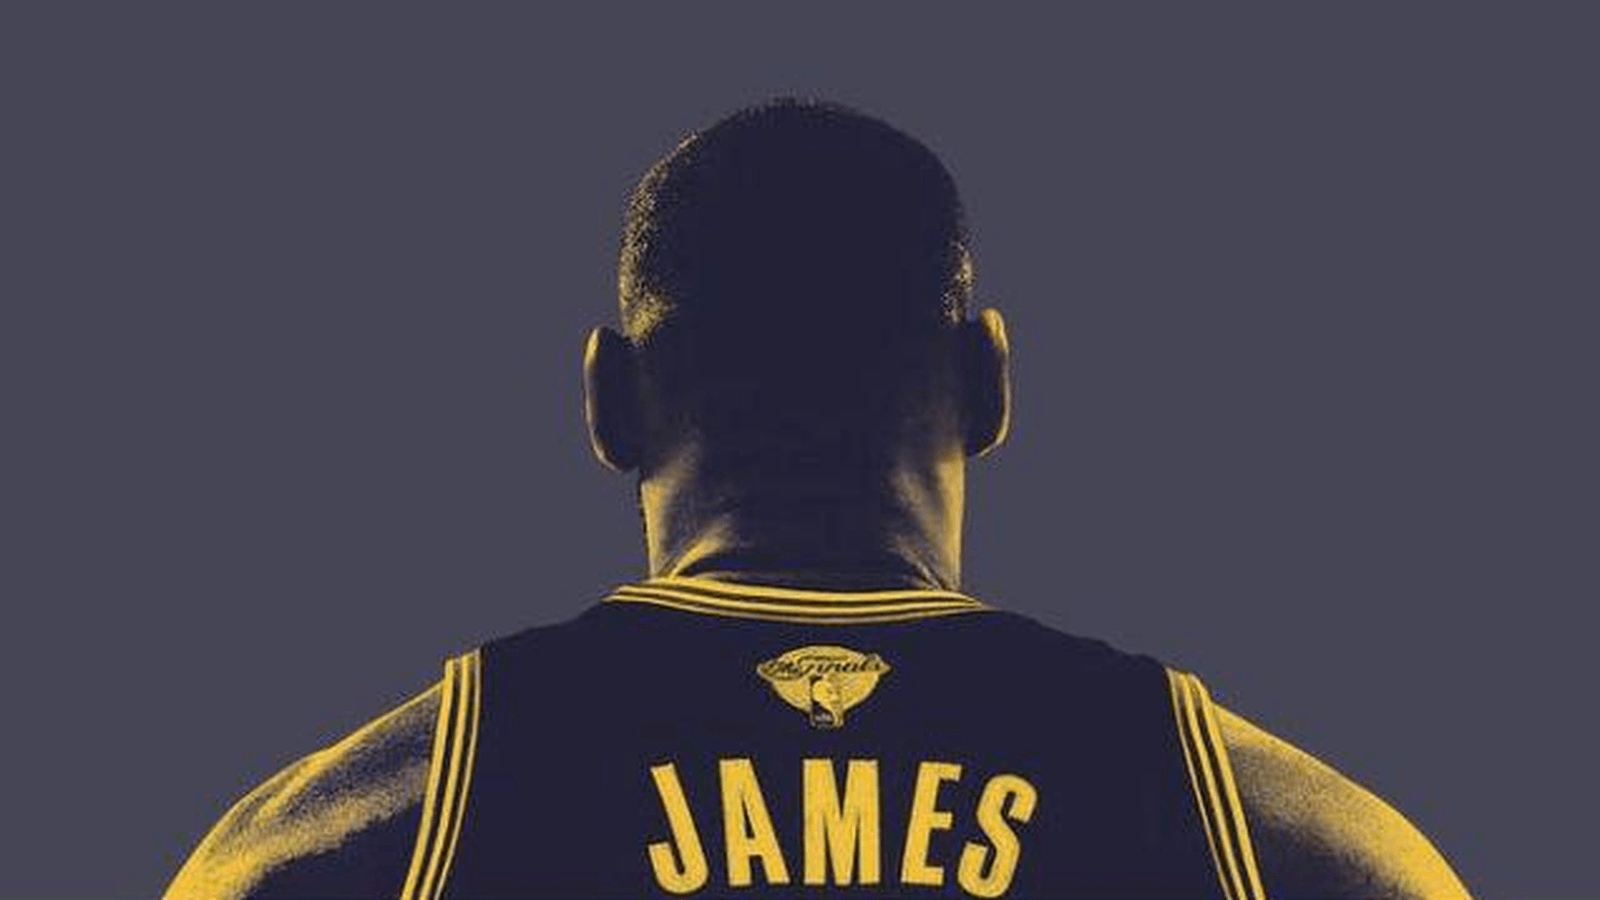 LeBron James losing the NBA Finals made a great Nike ad